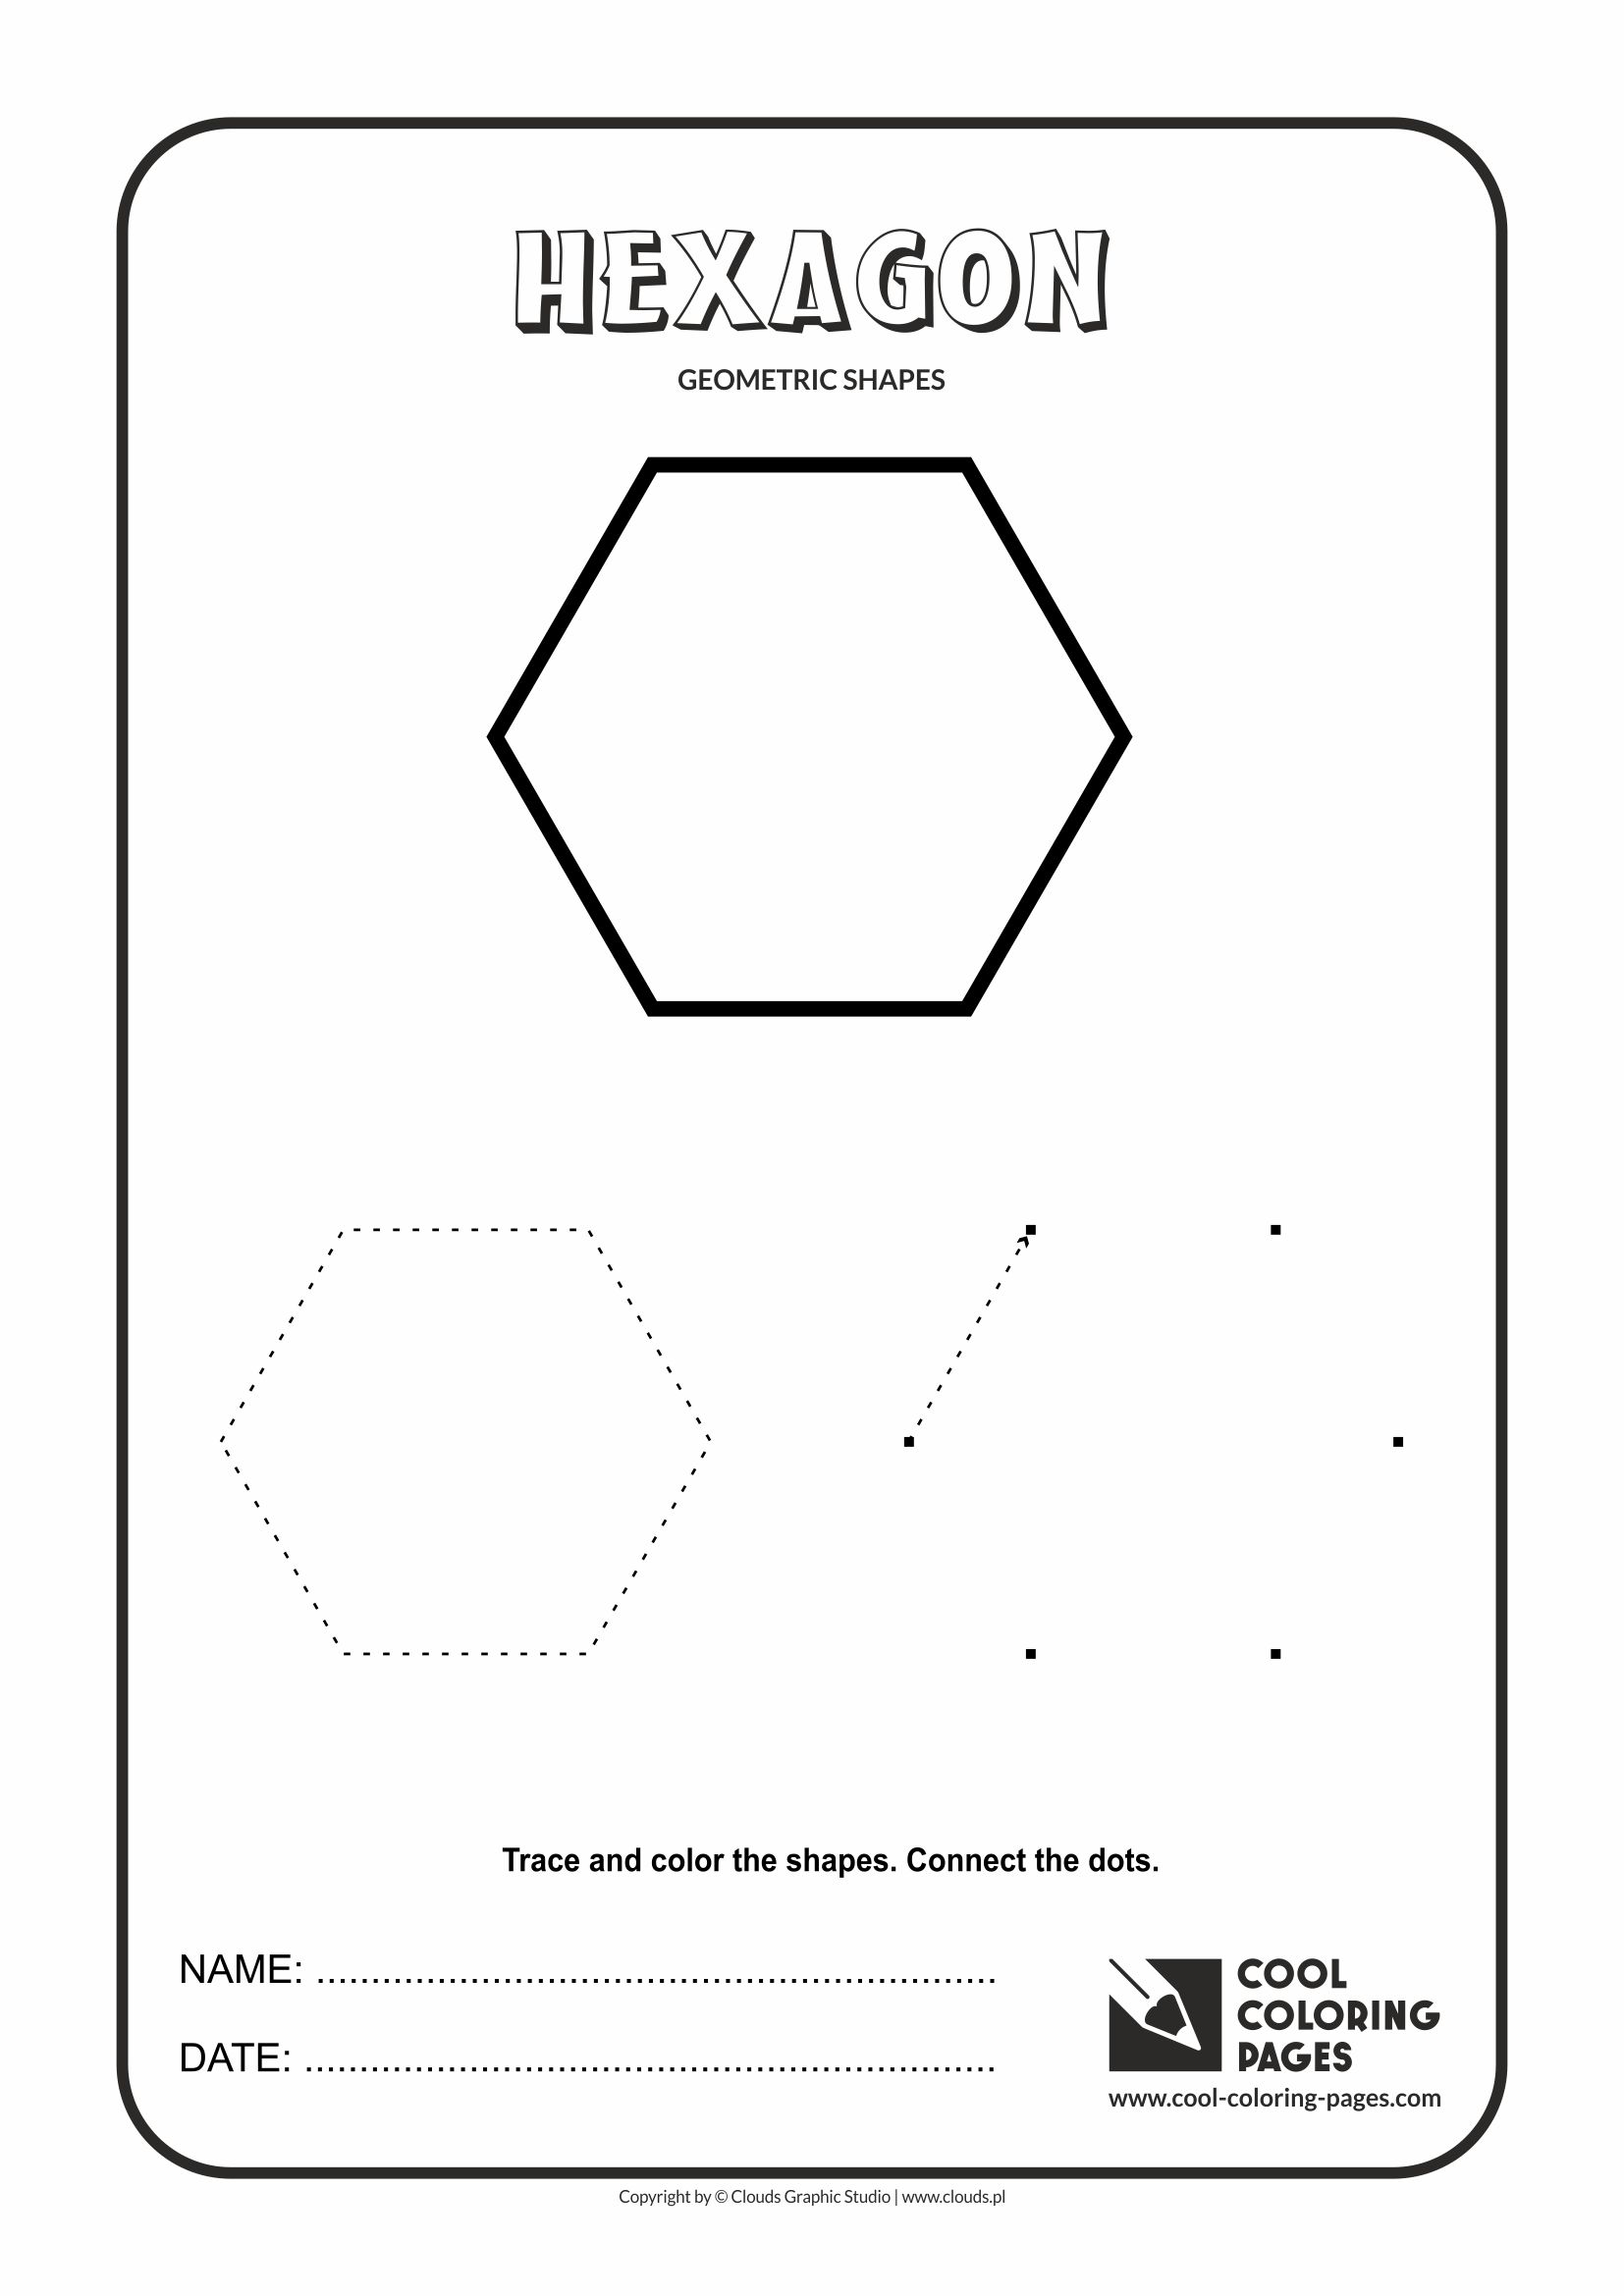 Cool Coloring Pages Geometric Shapes - Cool Coloring Pages | Free